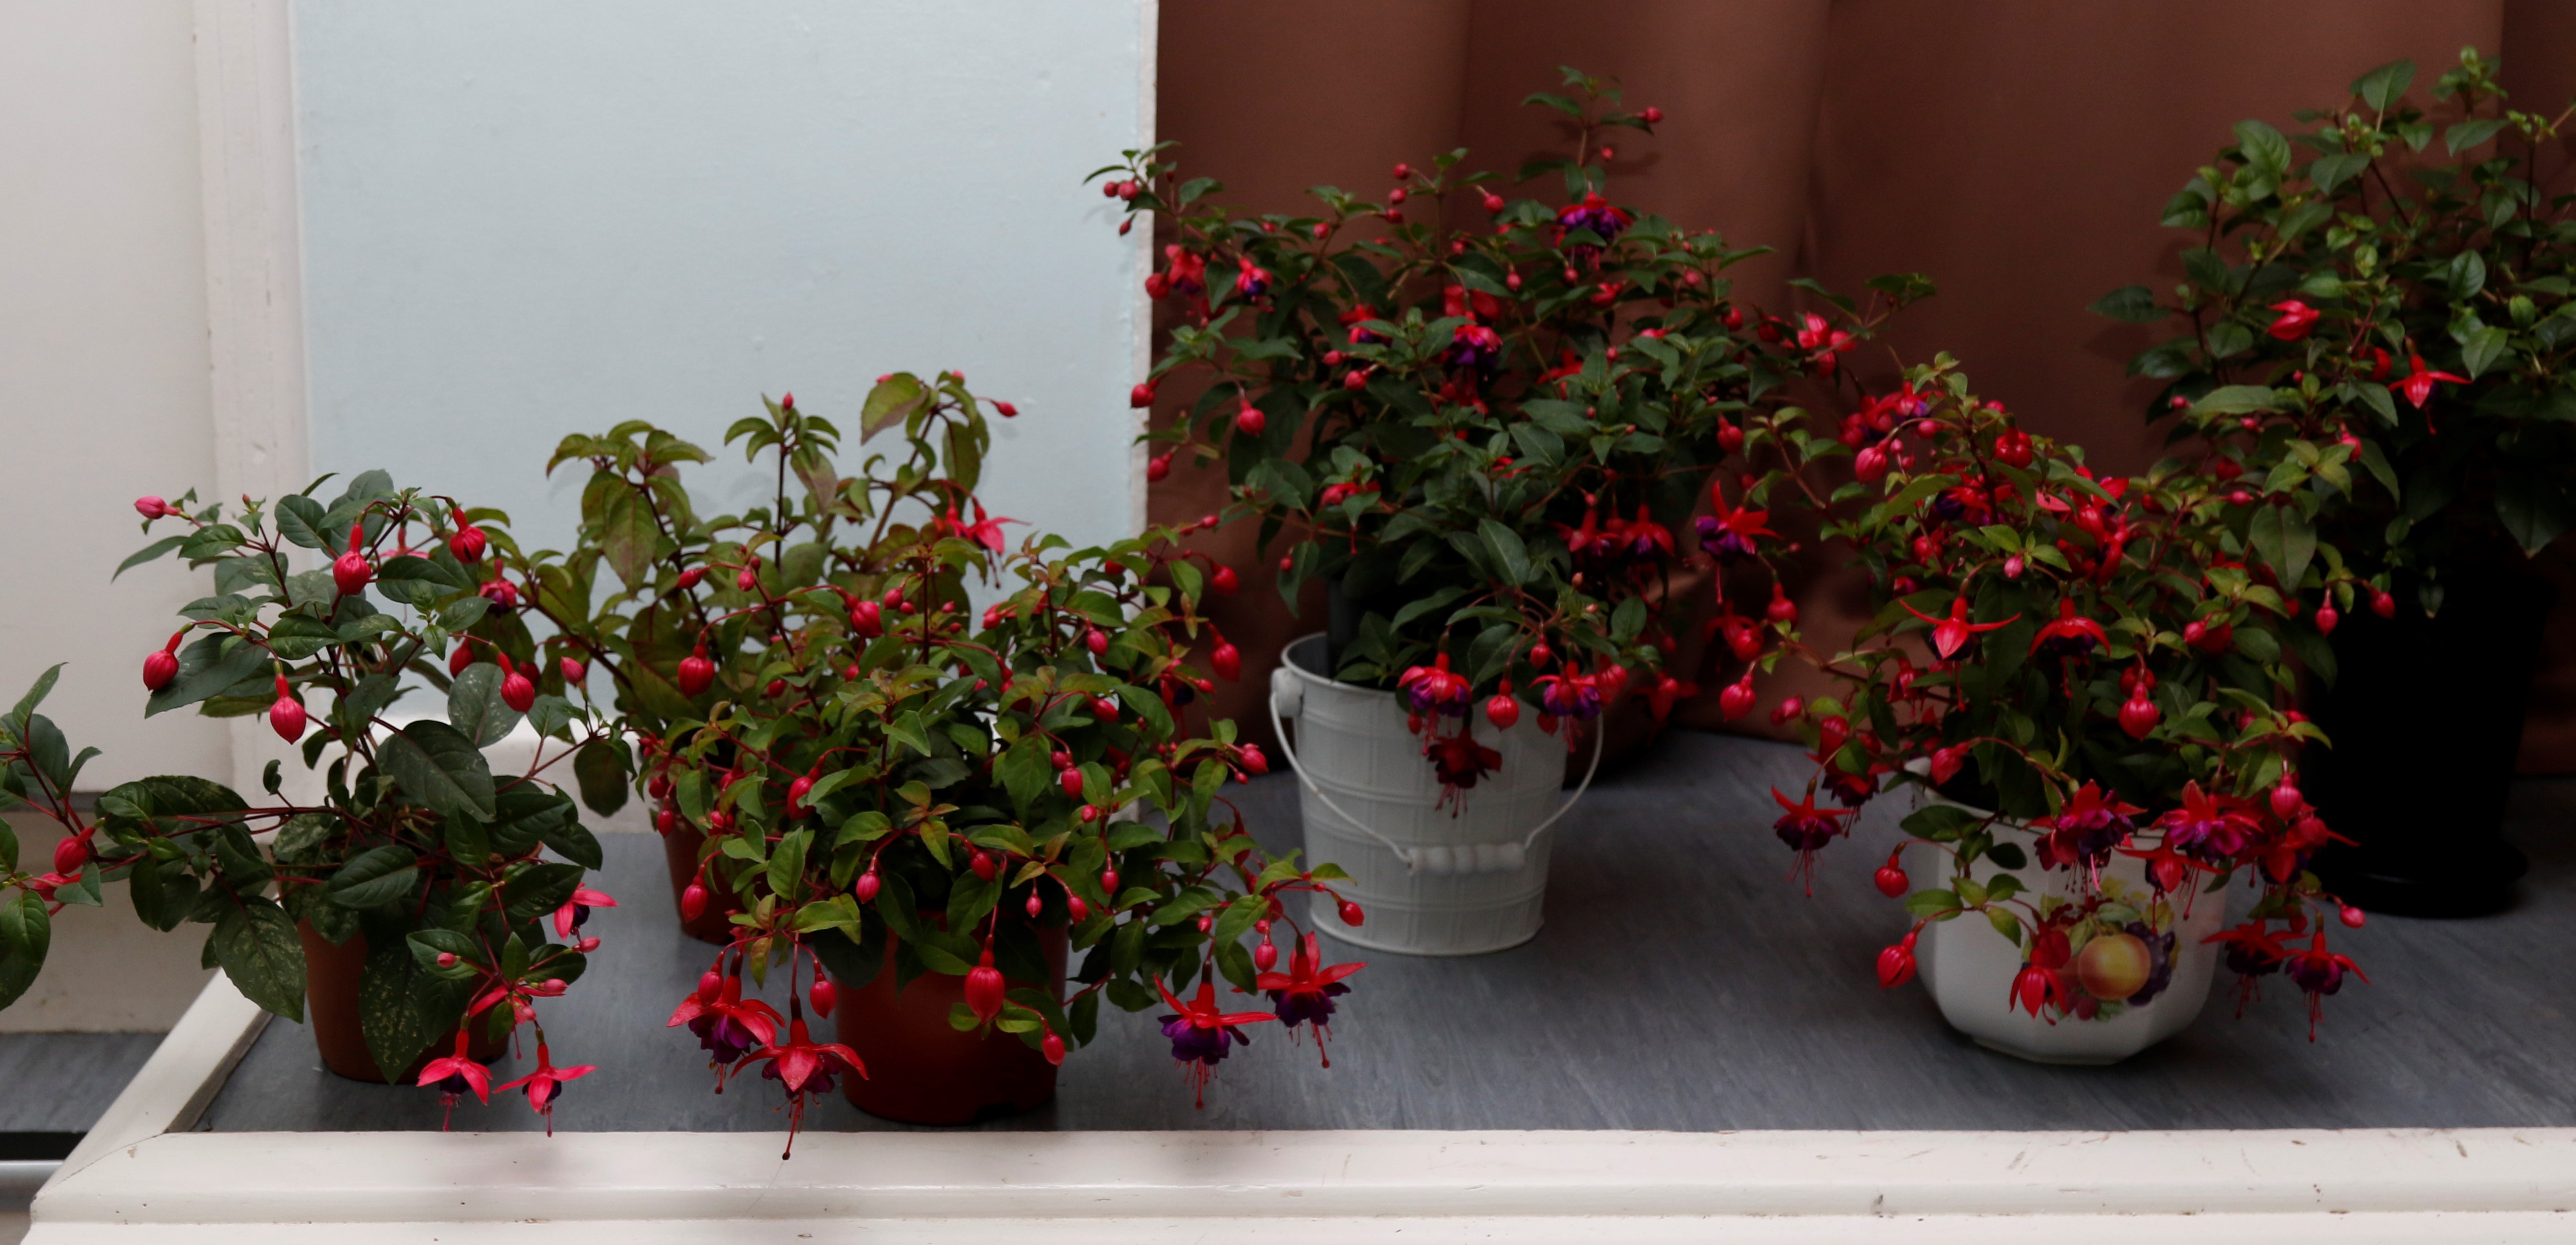 Winning fuchsia (at rear in white container)